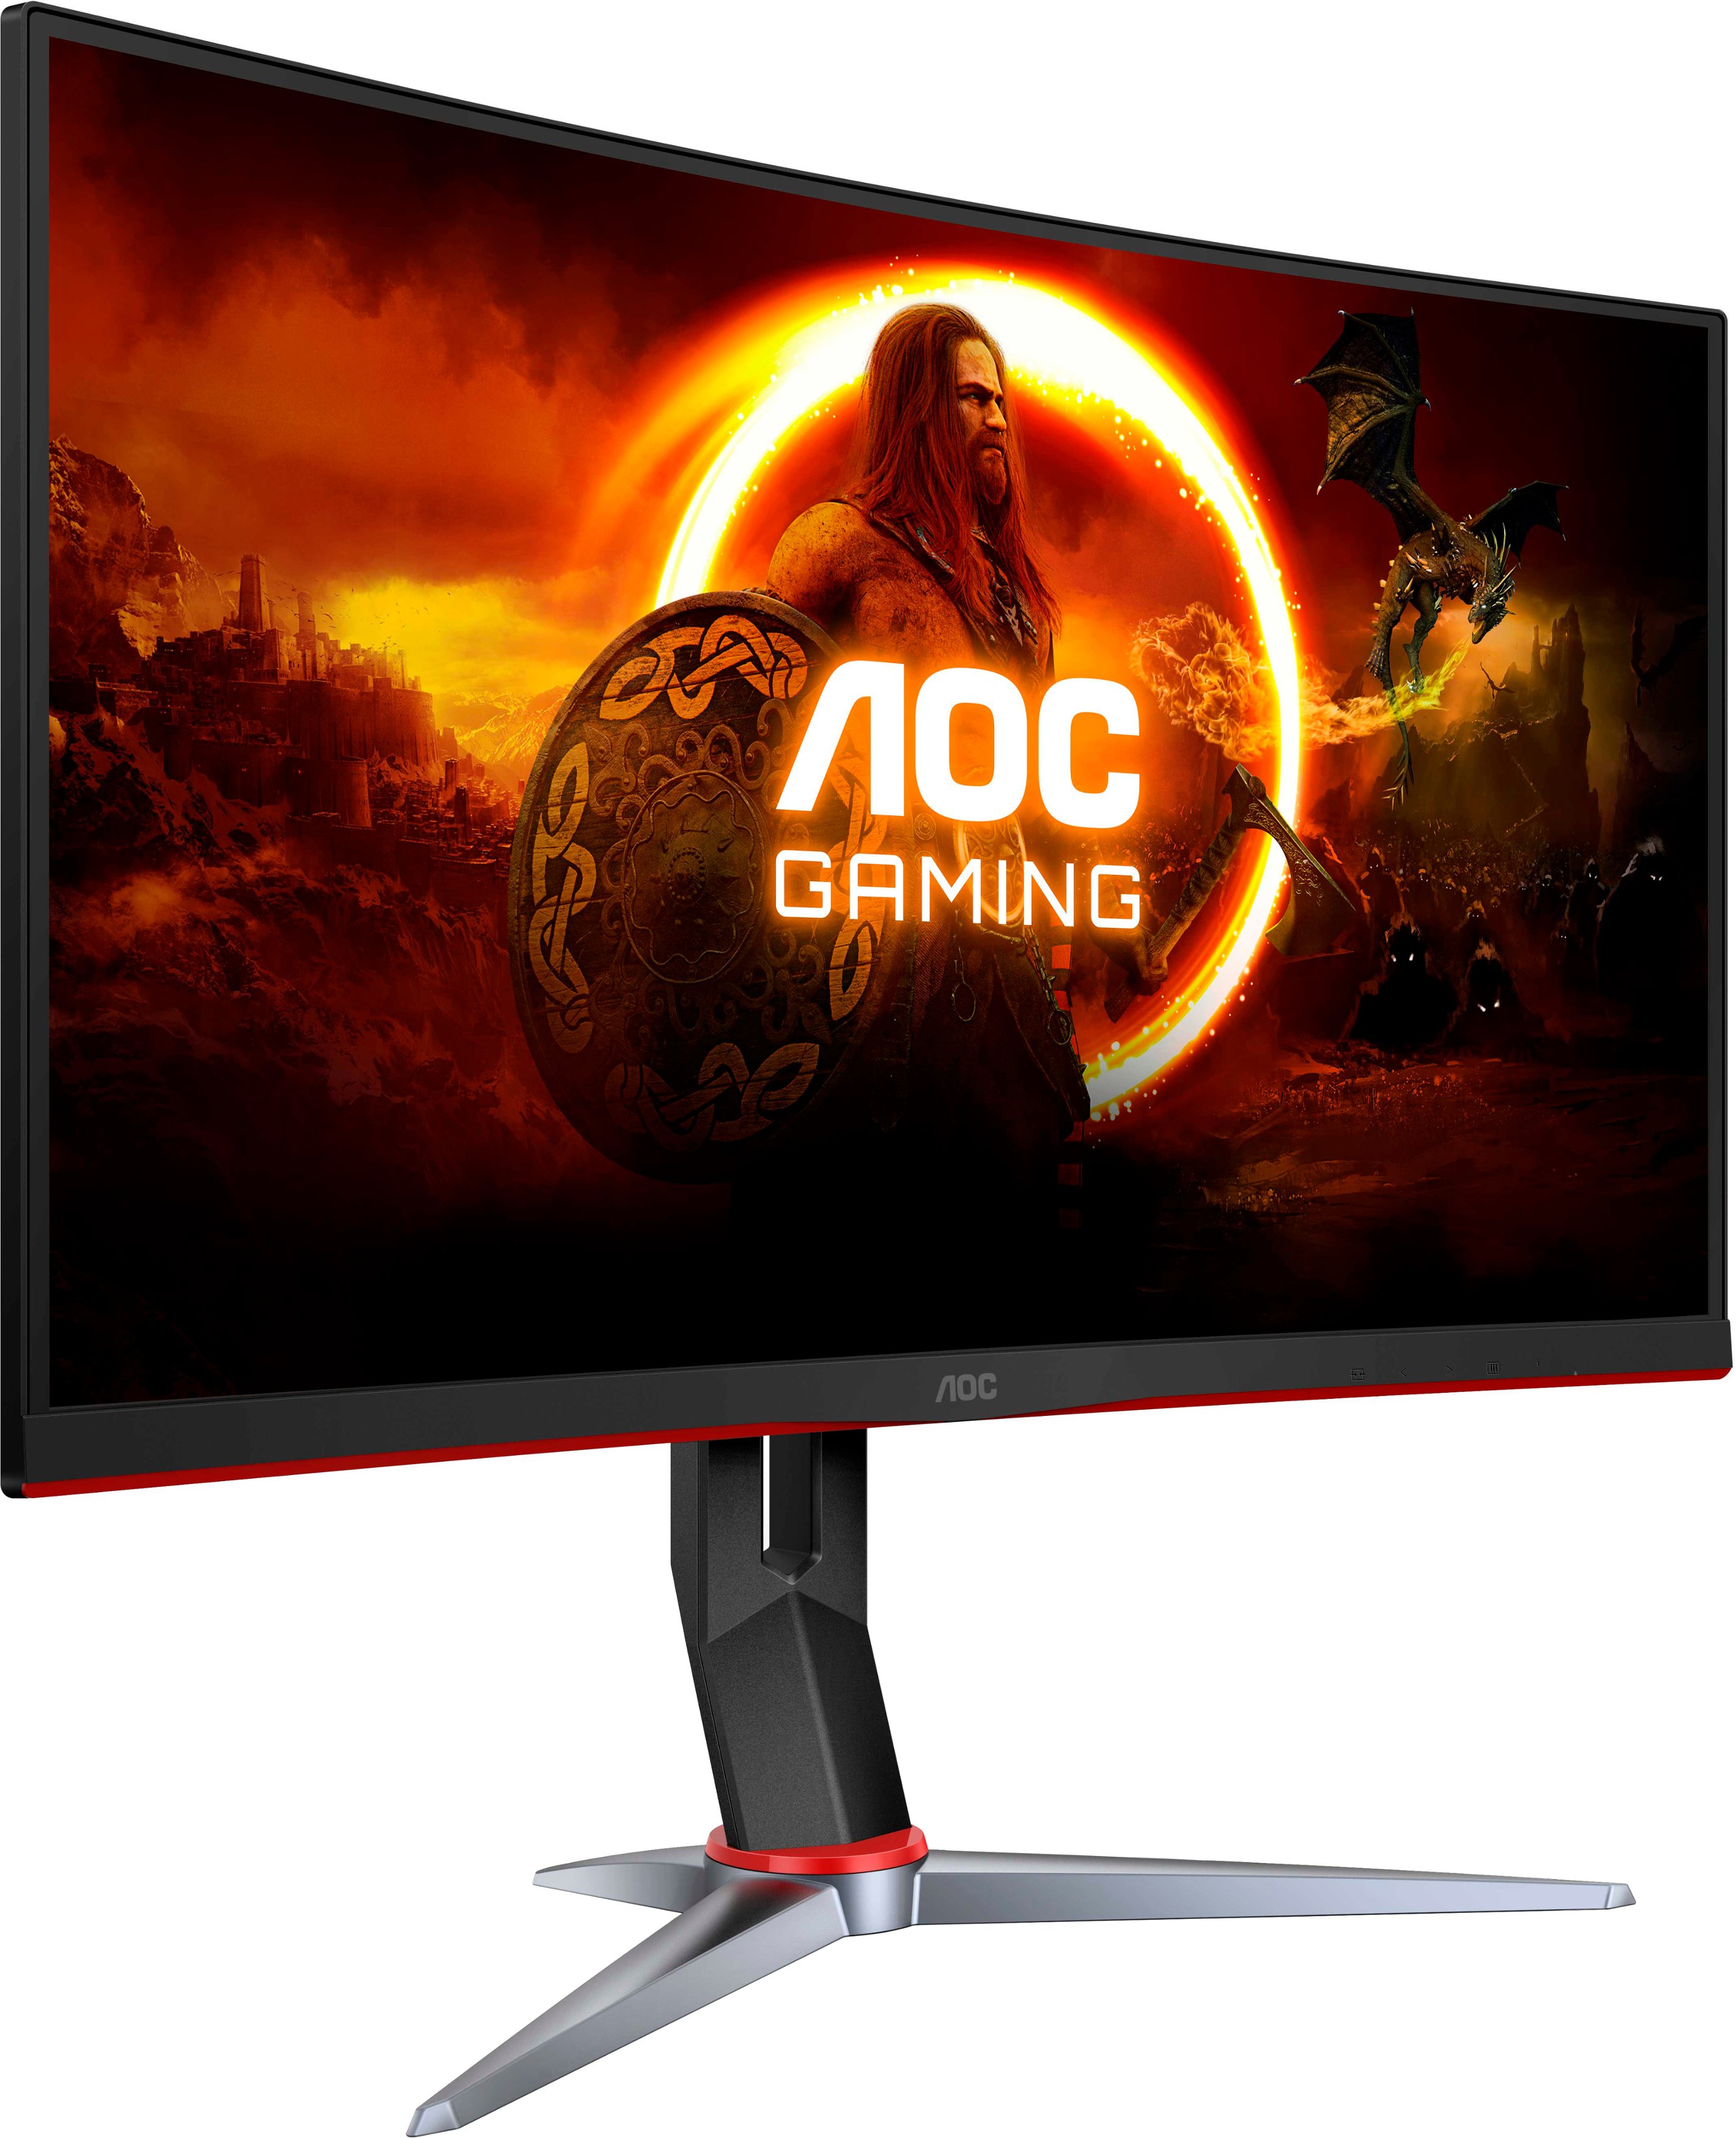 Angle View: AOC - G2 Series C32G2 32" LCD Curved FHD FreeSync Gaming Monitor - Black/Red